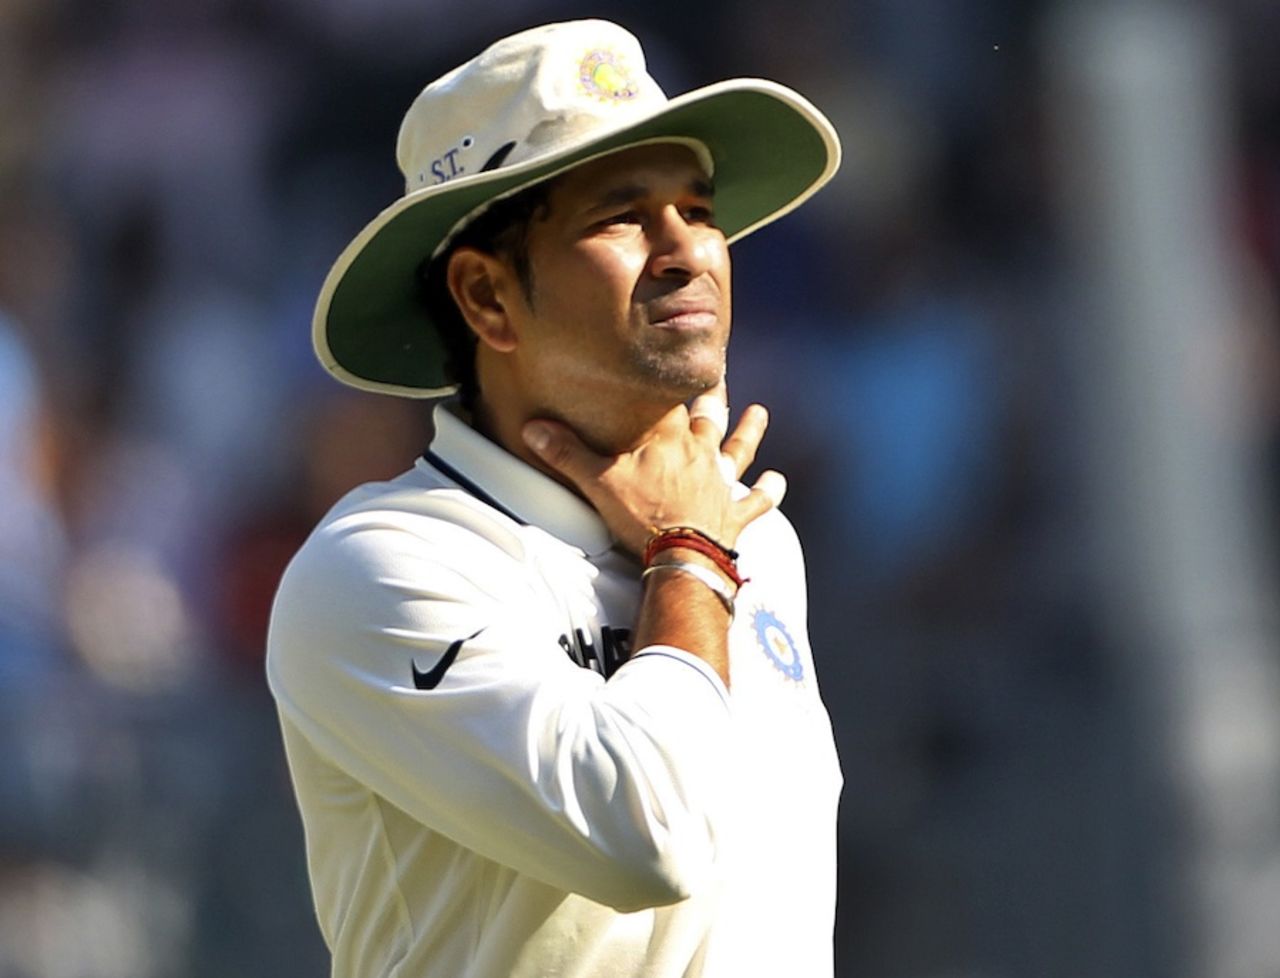 Sachin Tendulkar on the field at the Wankhede, India v West Indies, 3rd Test, Mumbai, 1st day, November 22, 2011